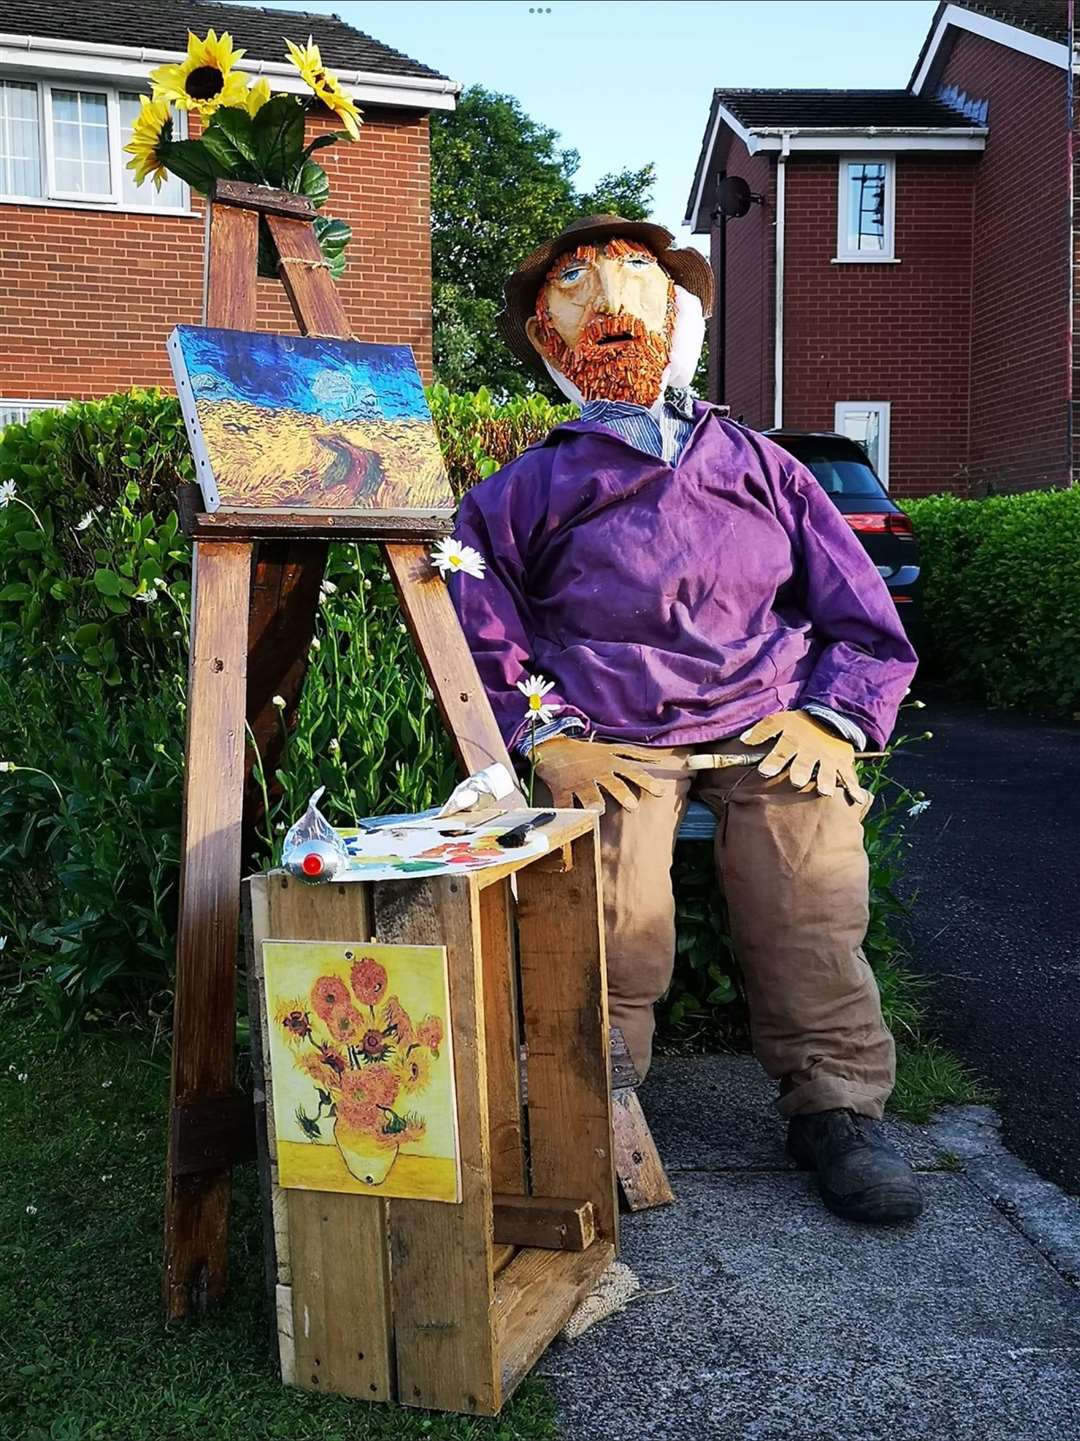 Louise Henson and Lizzy Heritage judged the best scarecrow in the competition, with the winner receiving a box of beer from the local brewery (Louise Henson/PA)